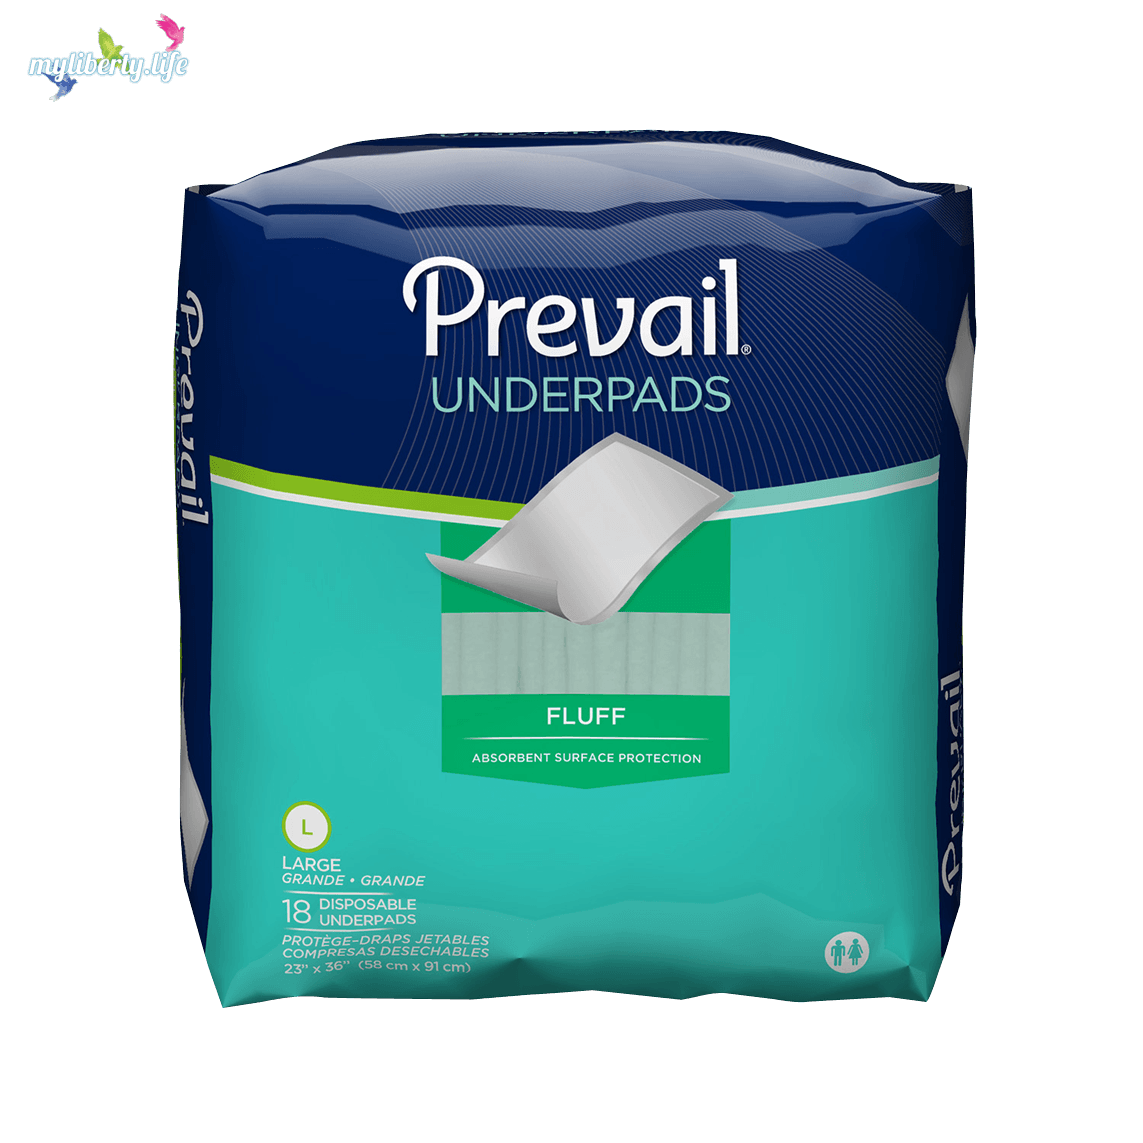 Underpad to protect beds and chairs from bladder leaks - Prevail Underpads  –